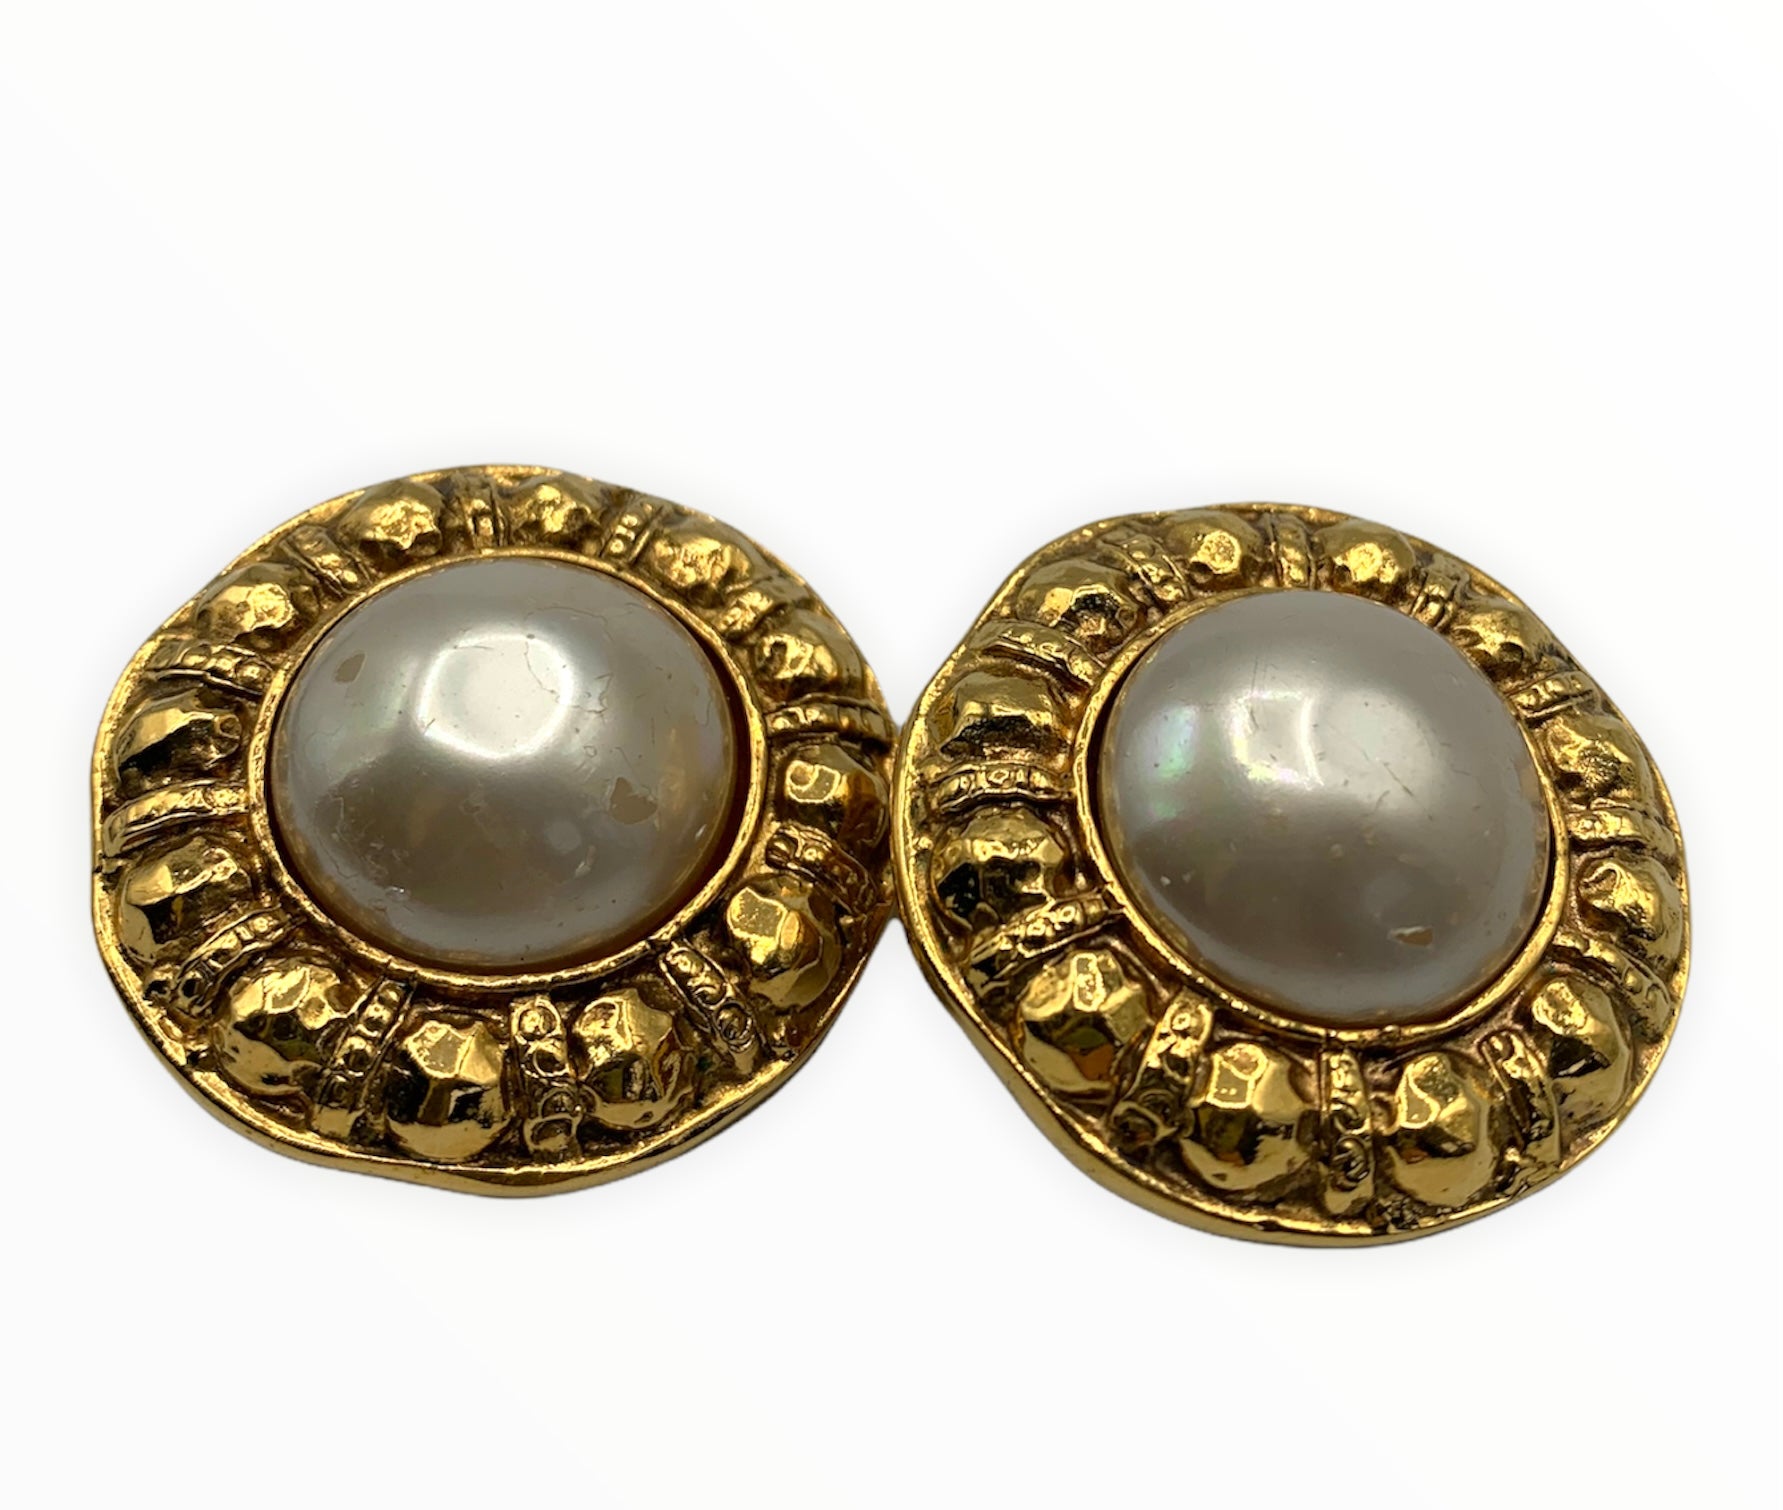 Chanel Vintage Goldtone and Faux Pearl Clip-On Earrings  Gold round  earrings, Small gold hoop earrings, Clip on earrings